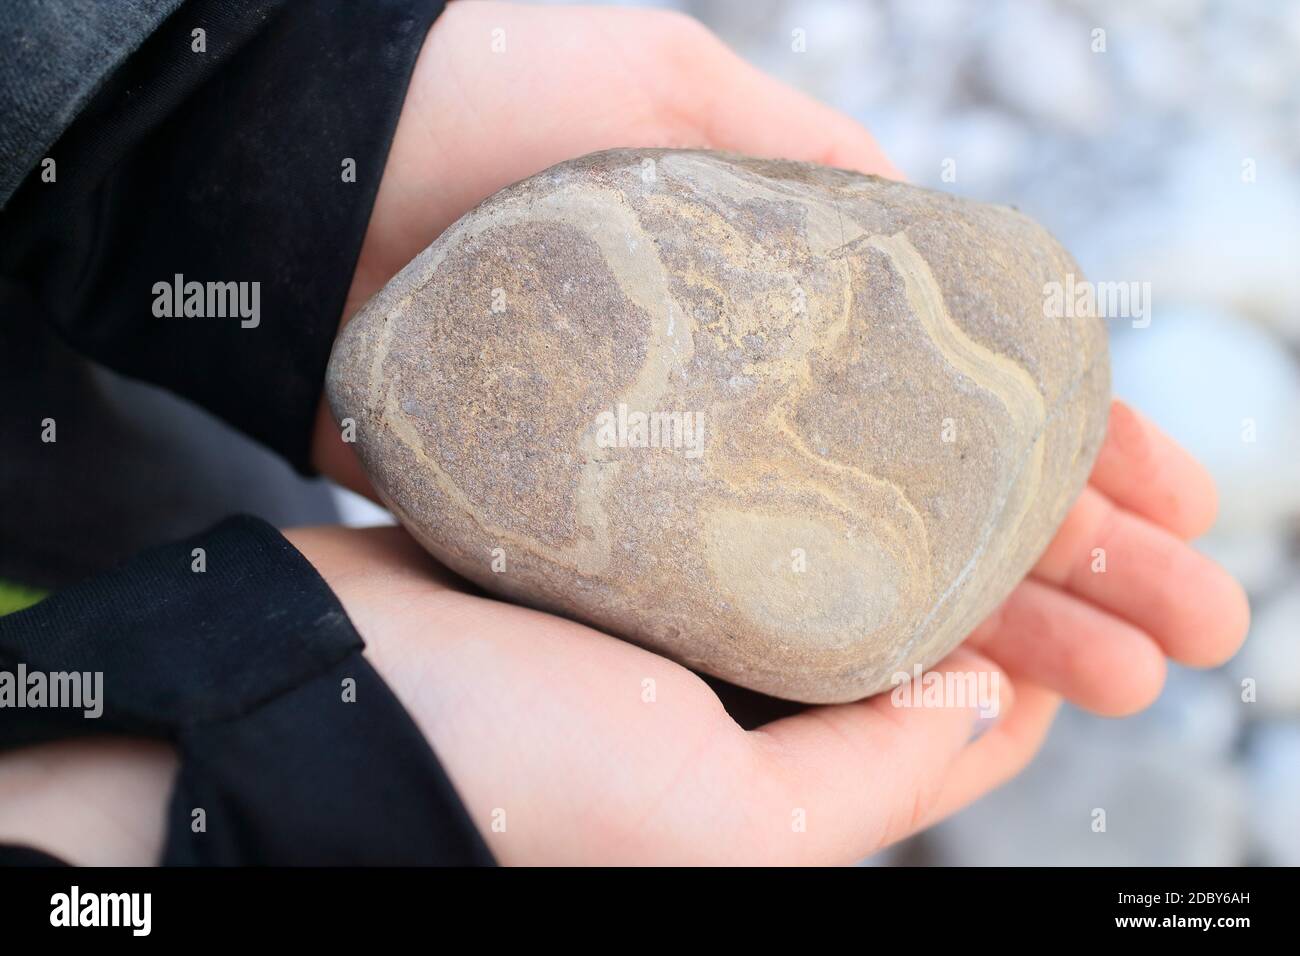 colored stone in hand of a child Stock Photo